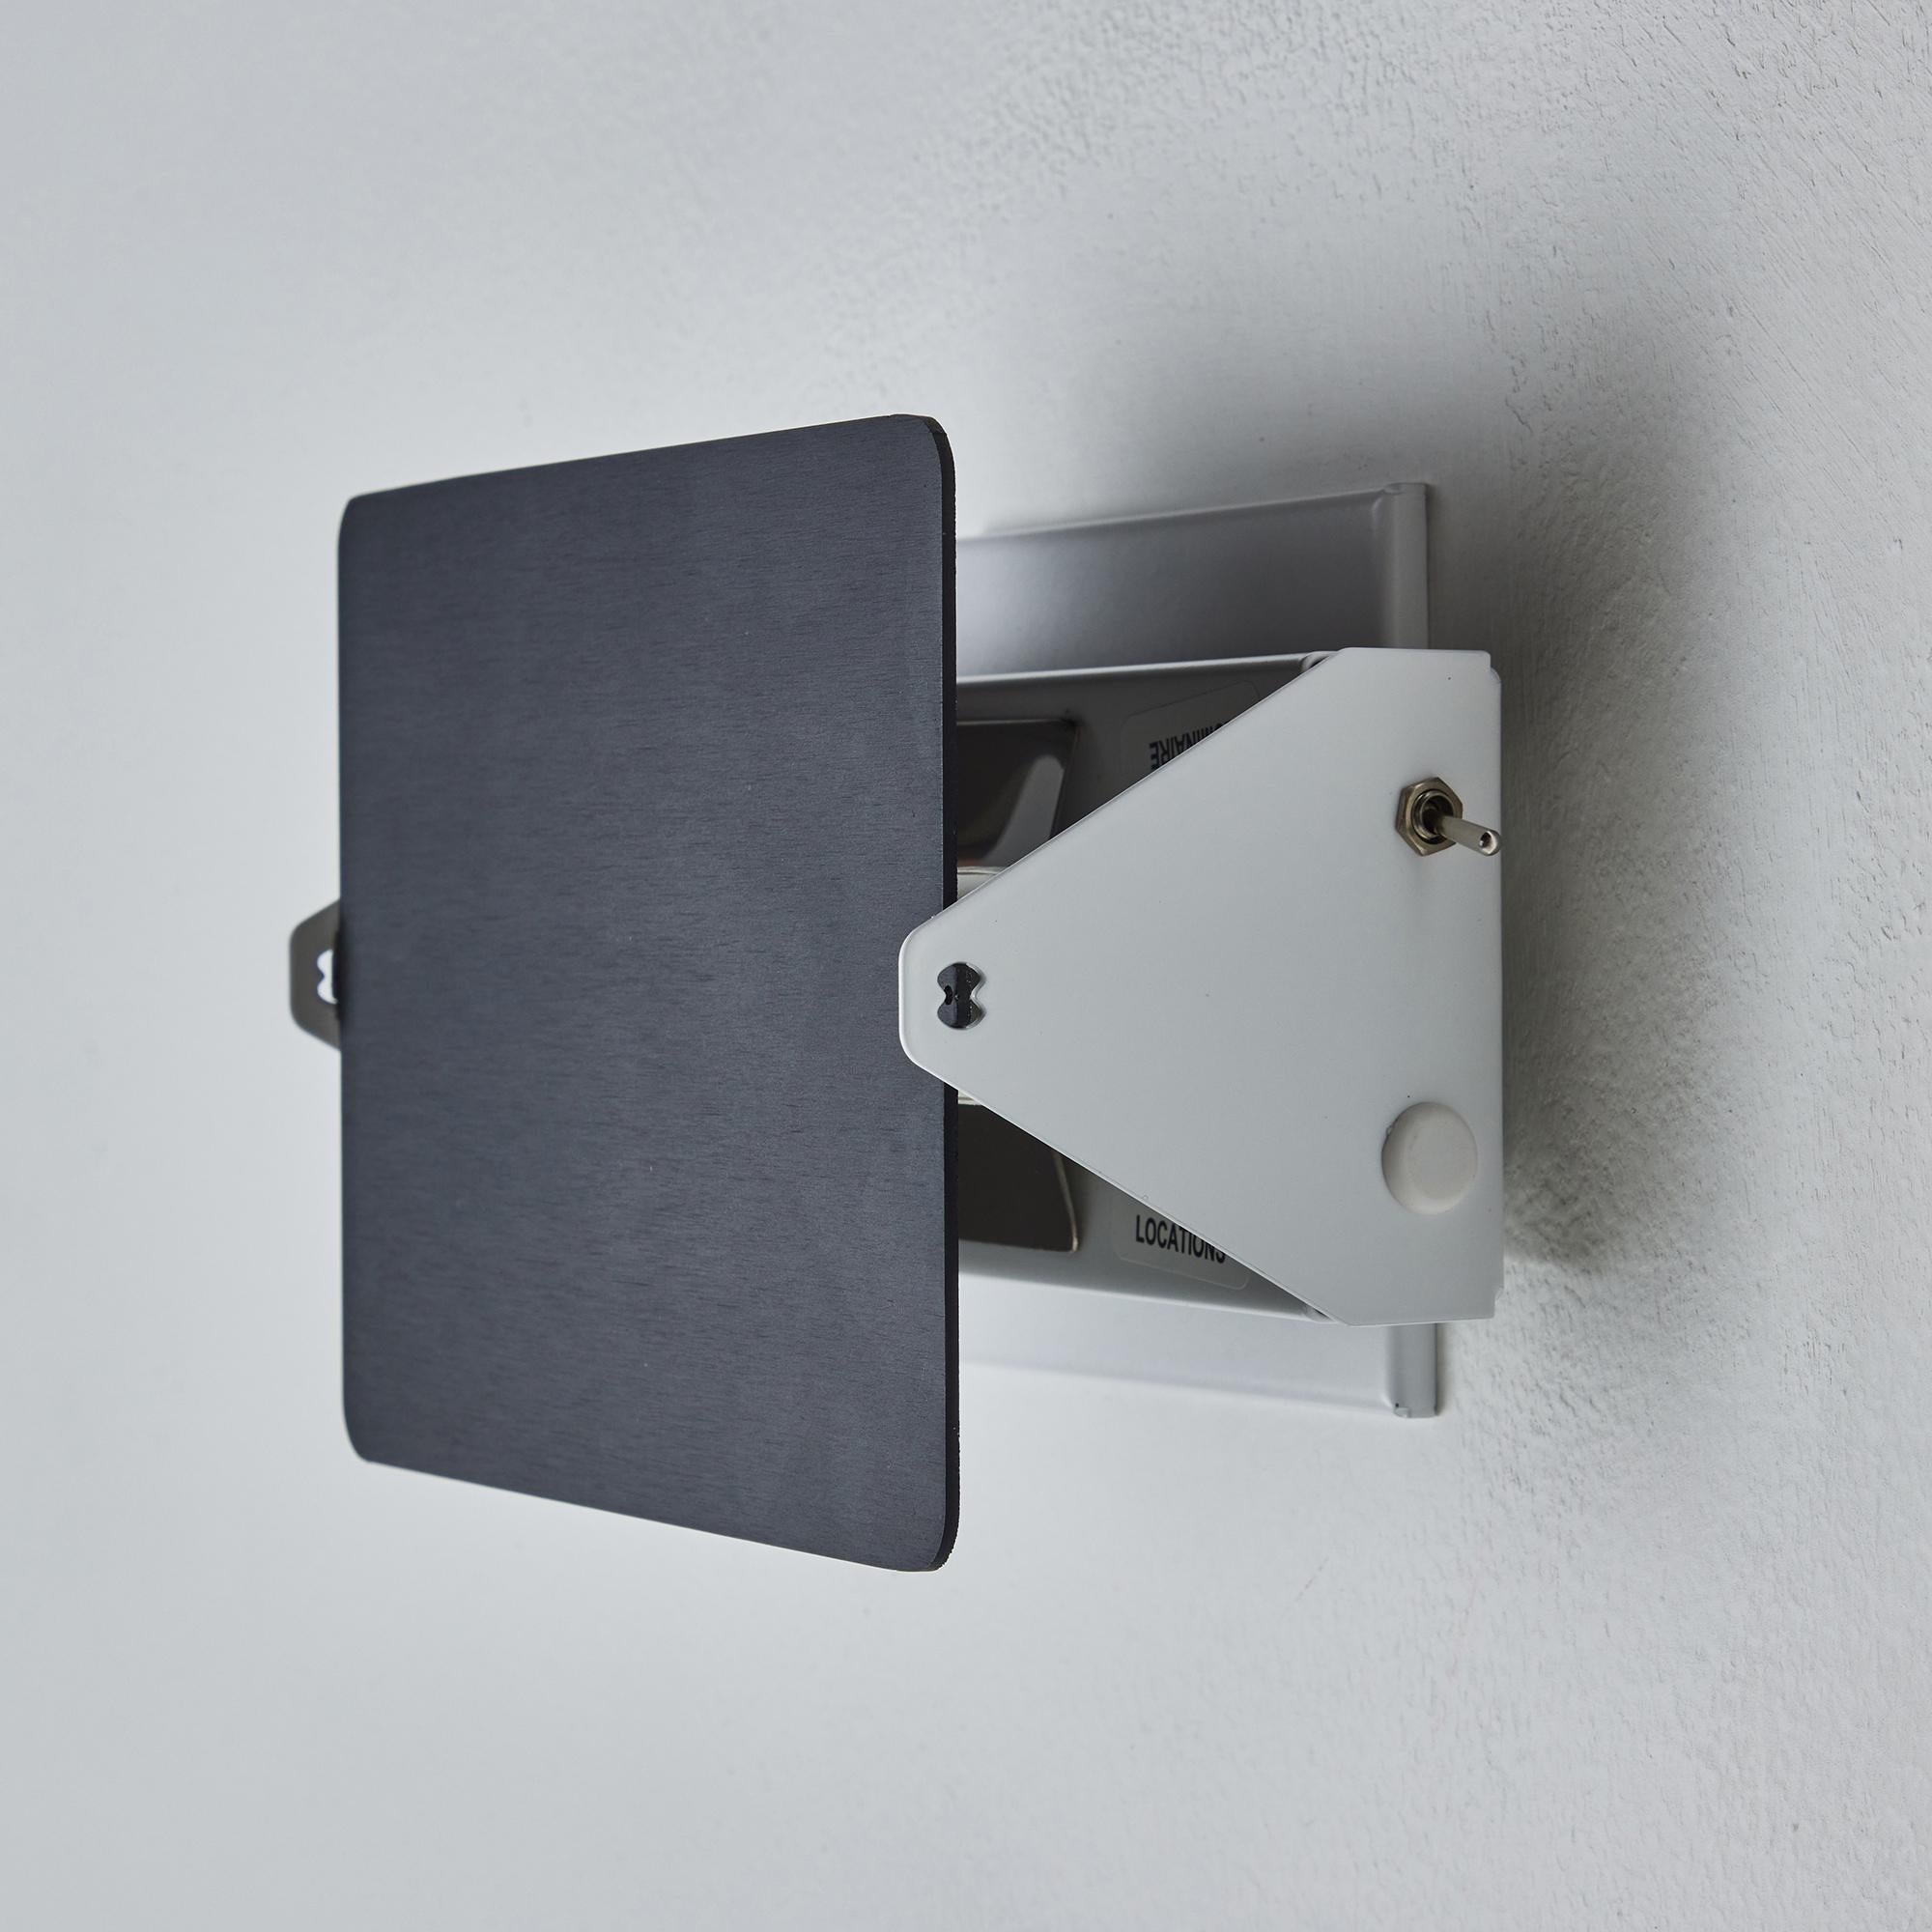 Charlotte Perriand 'Applique Á Volet Pivotant' Wall Light in Black and White For Sale 2